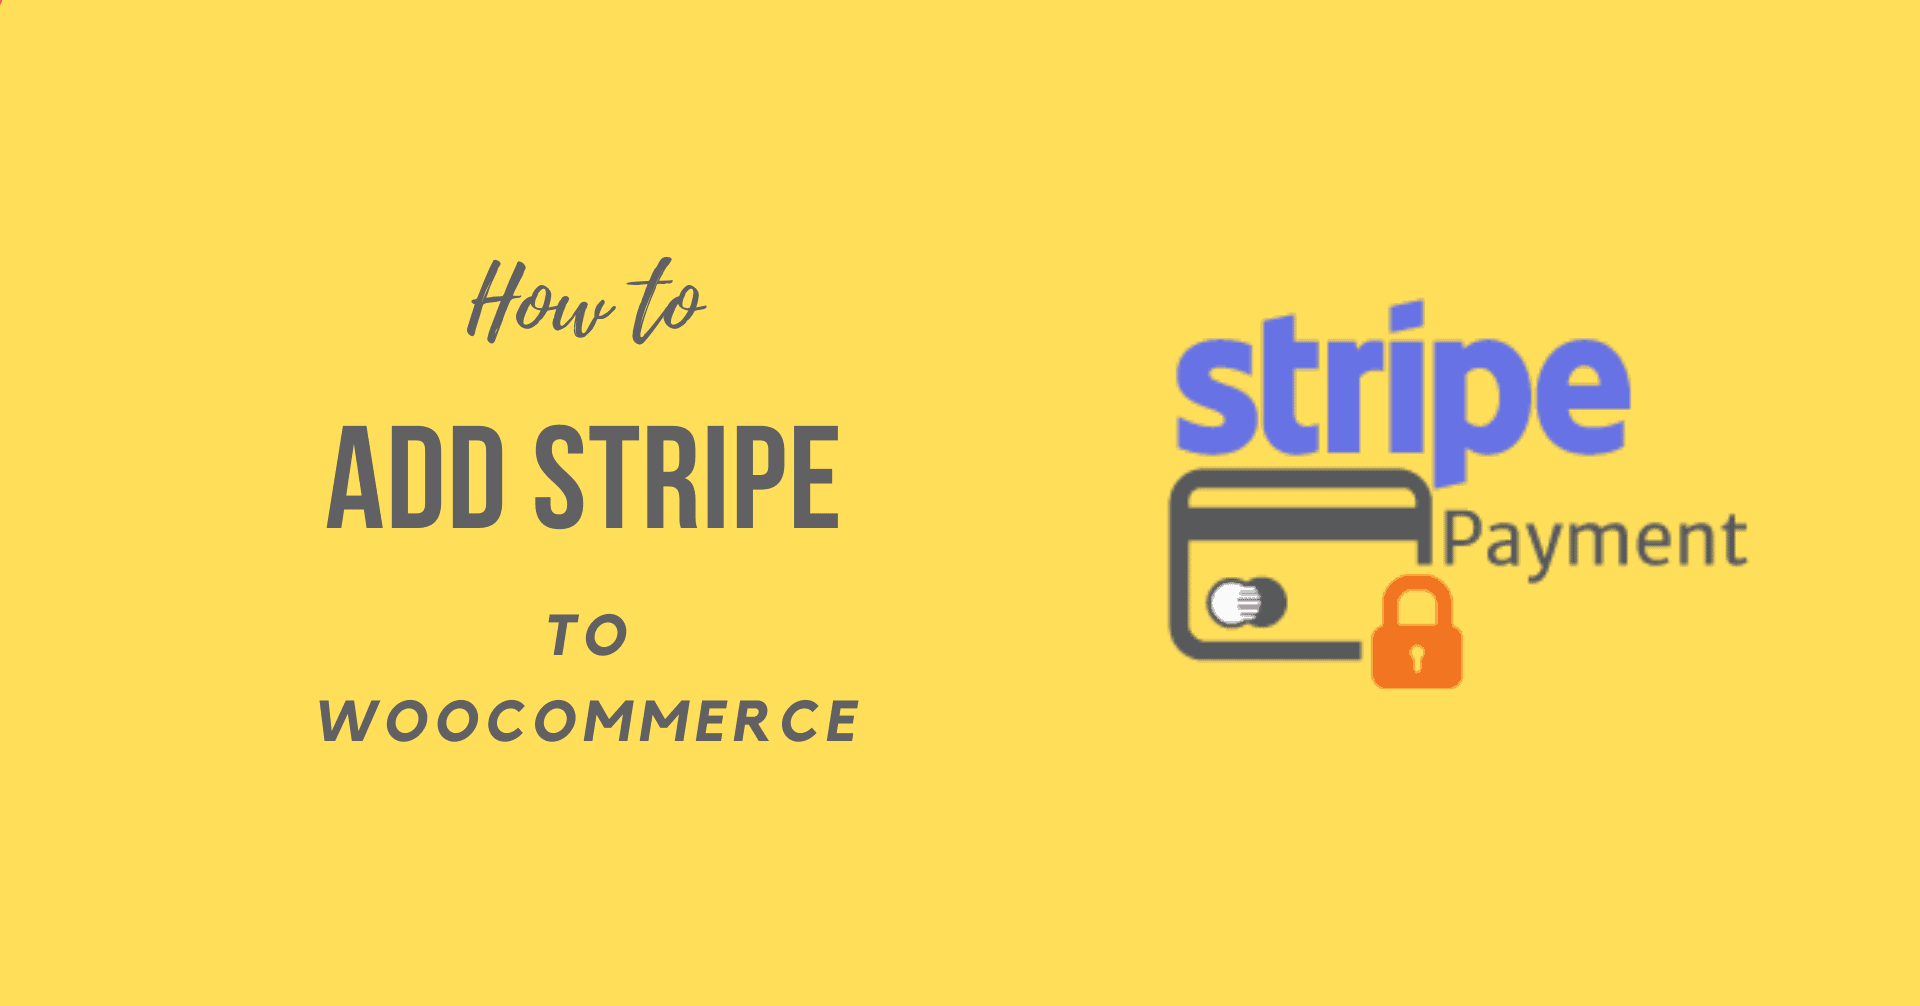 How to Add Stripe to WooCommerce